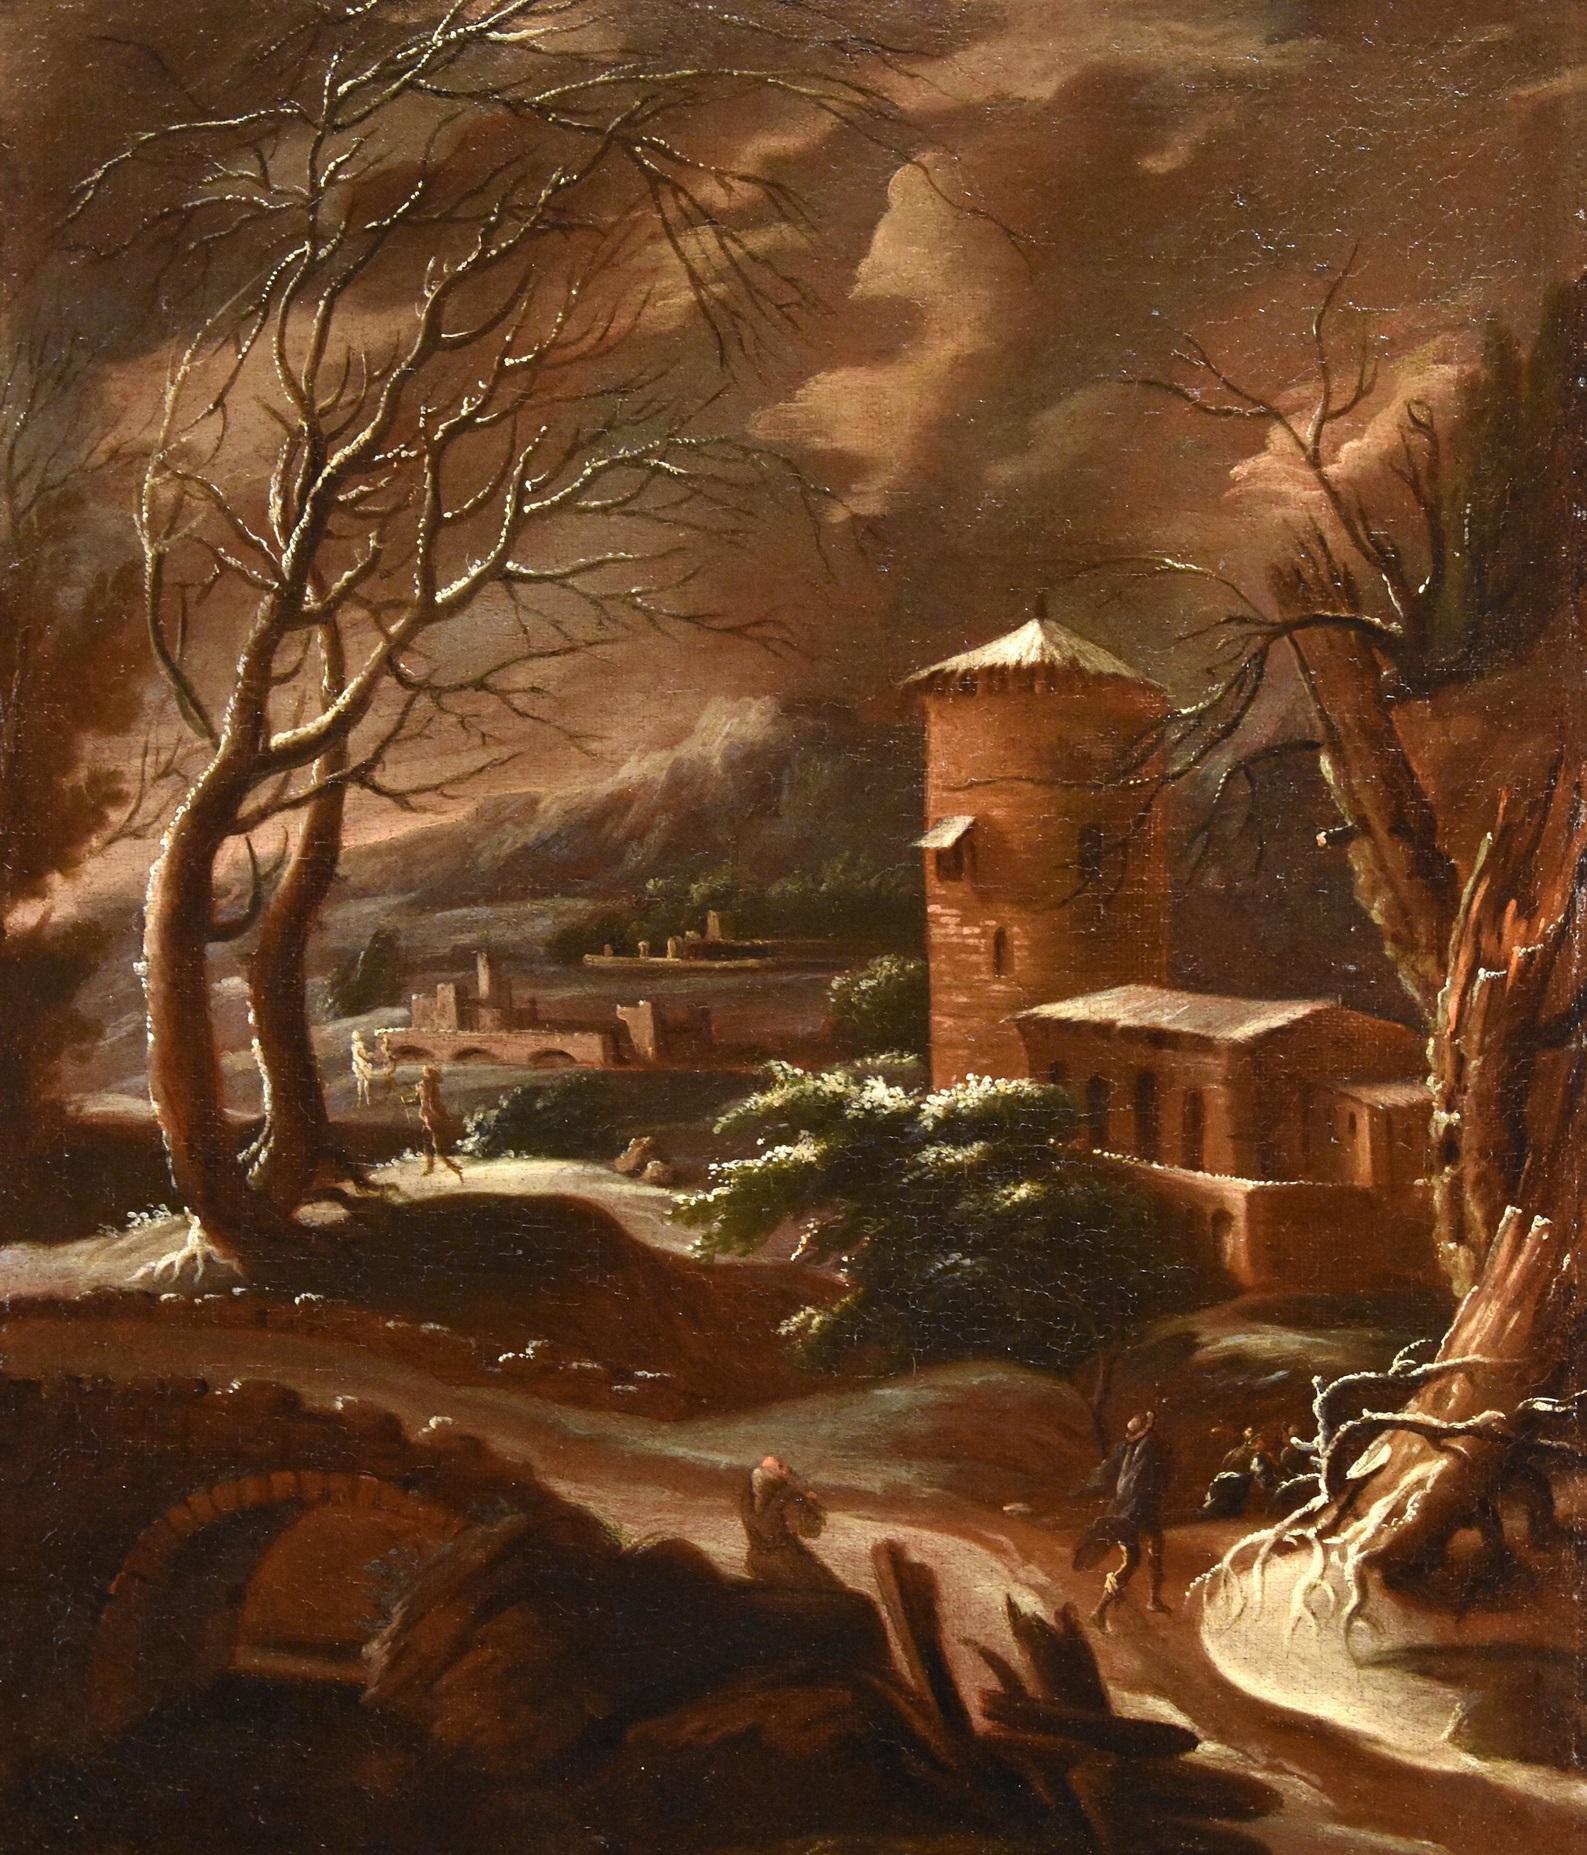 Winter Landscape Foschi Paint 18th CEntury Paint Oil on canvas Old master Italy - Old Masters Painting by  Francesco Foschi (ancona, 1710 - Rome, 1780) 